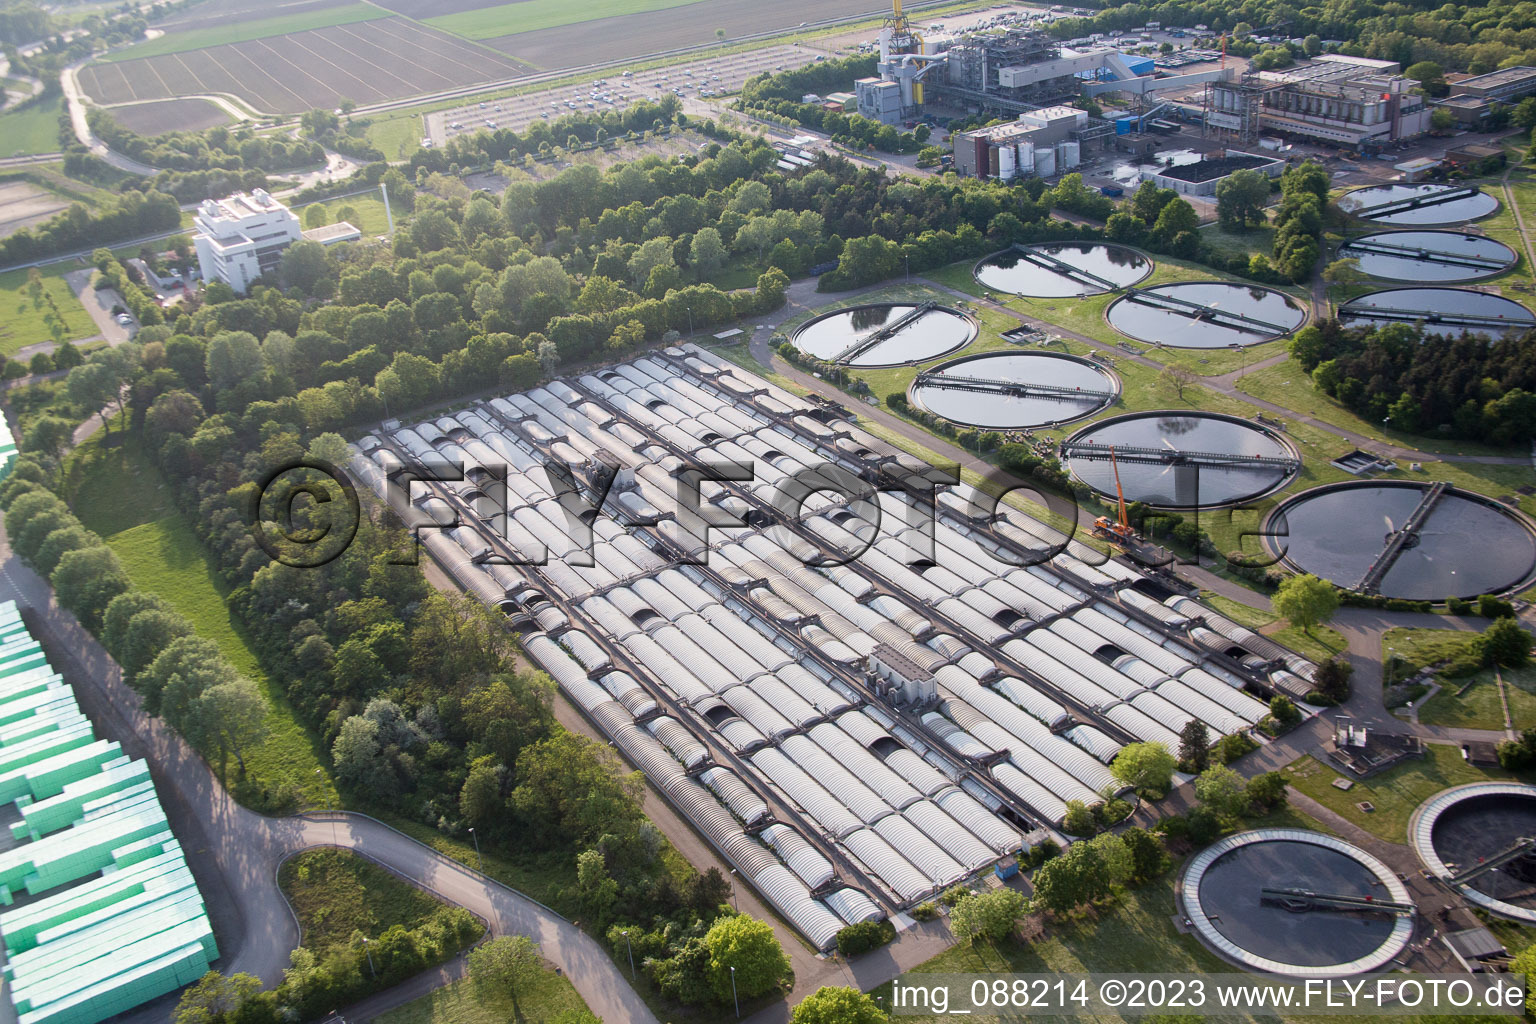 Aerial view of BASF in the district Mörsch in Frankenthal in the state Rhineland-Palatinate, Germany